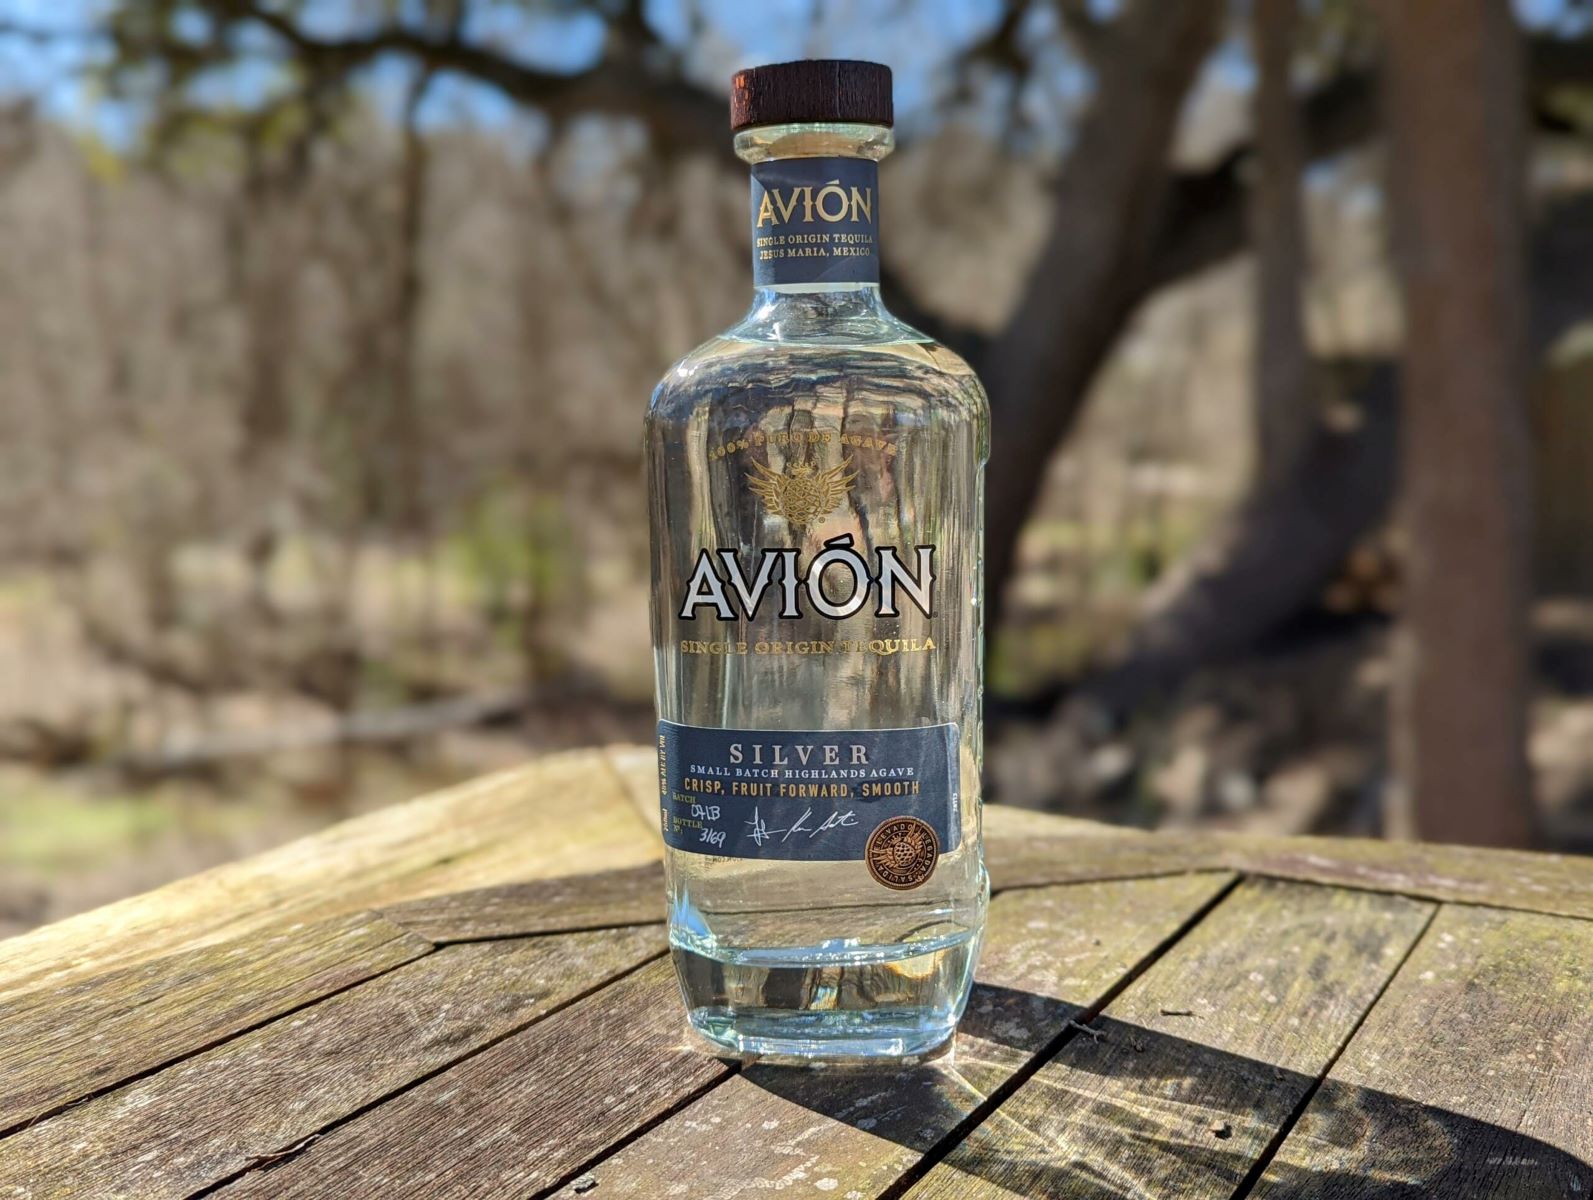 19-astonishing-facts-about-avion-tequila